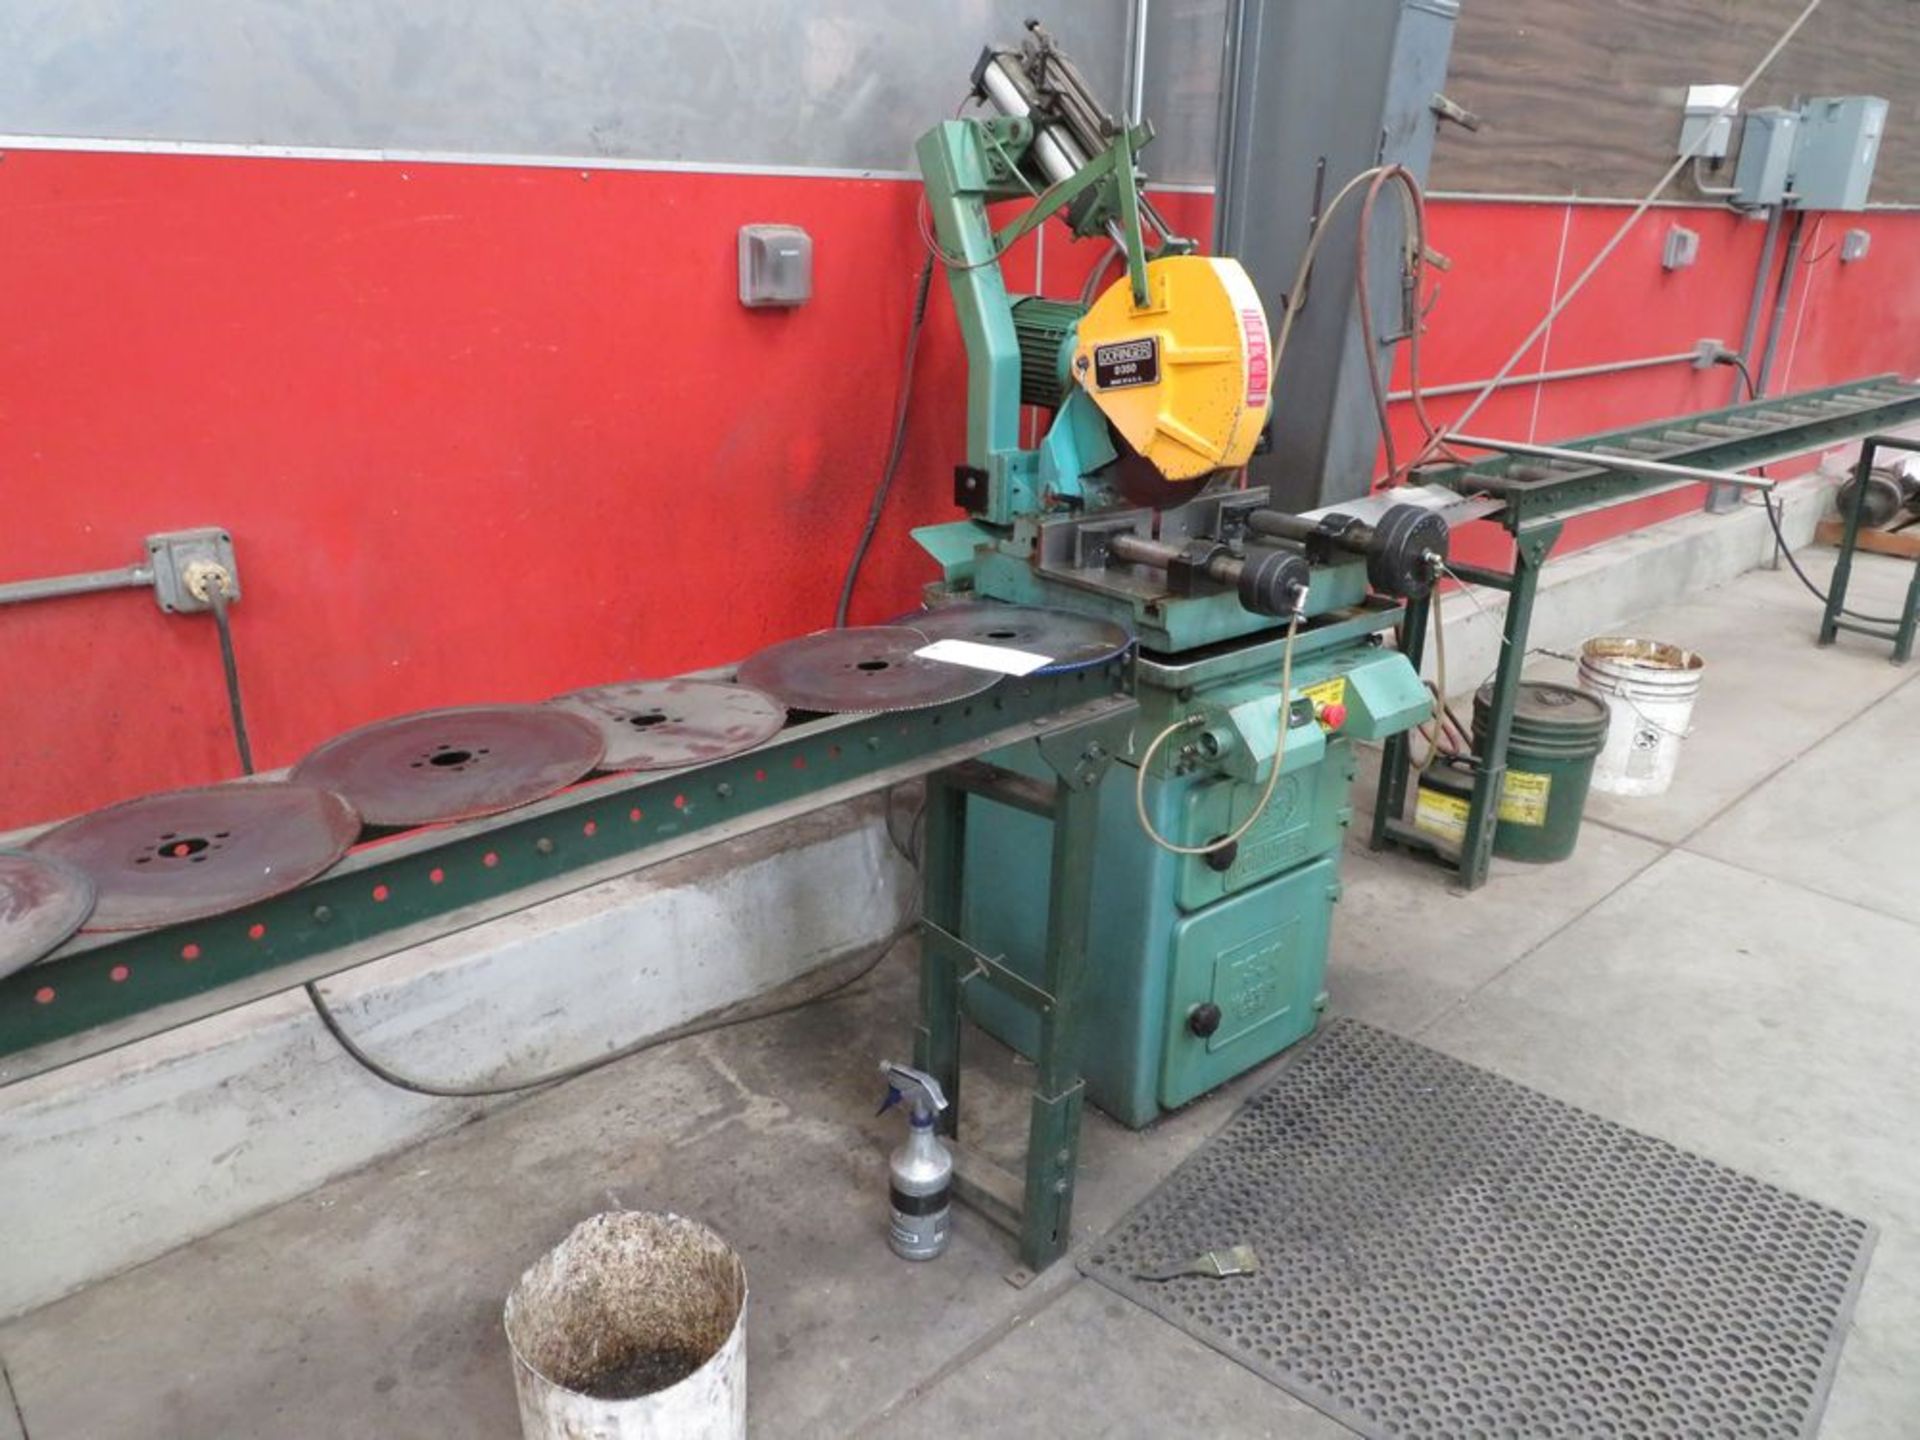 Doringer mod. D350, 12" Cold Saw w/ Twin Clamping, Infeed & Outfeed